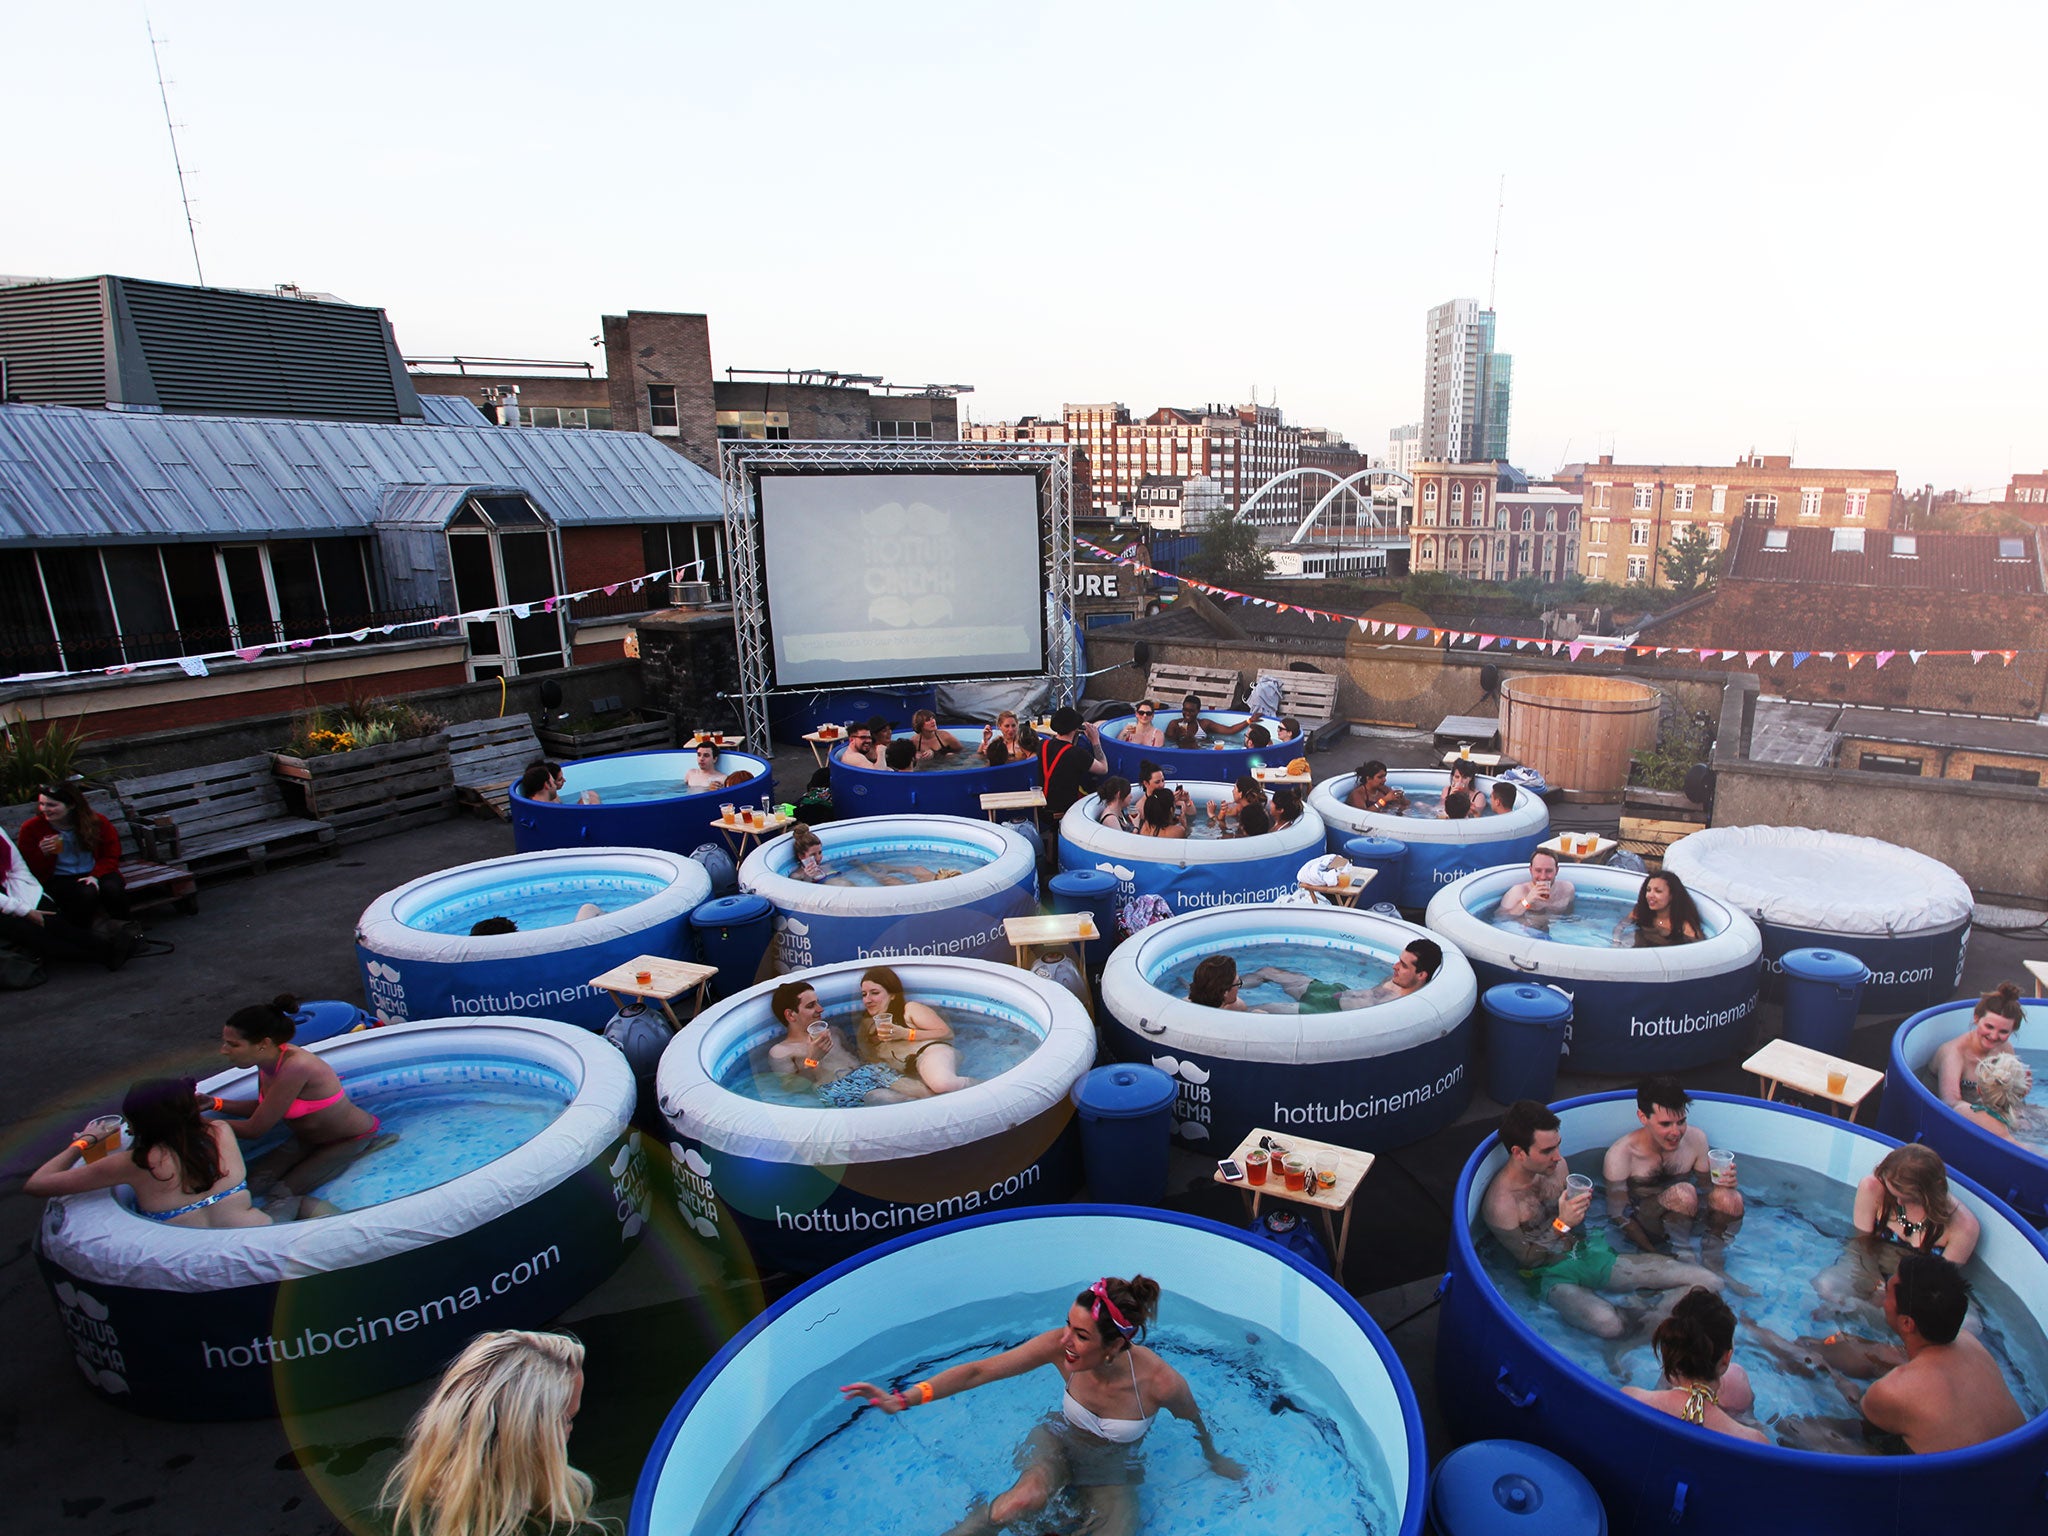 The Hot Tub Cinema is an open-air cinema with a twist and one of the best options for a hot summer's evening